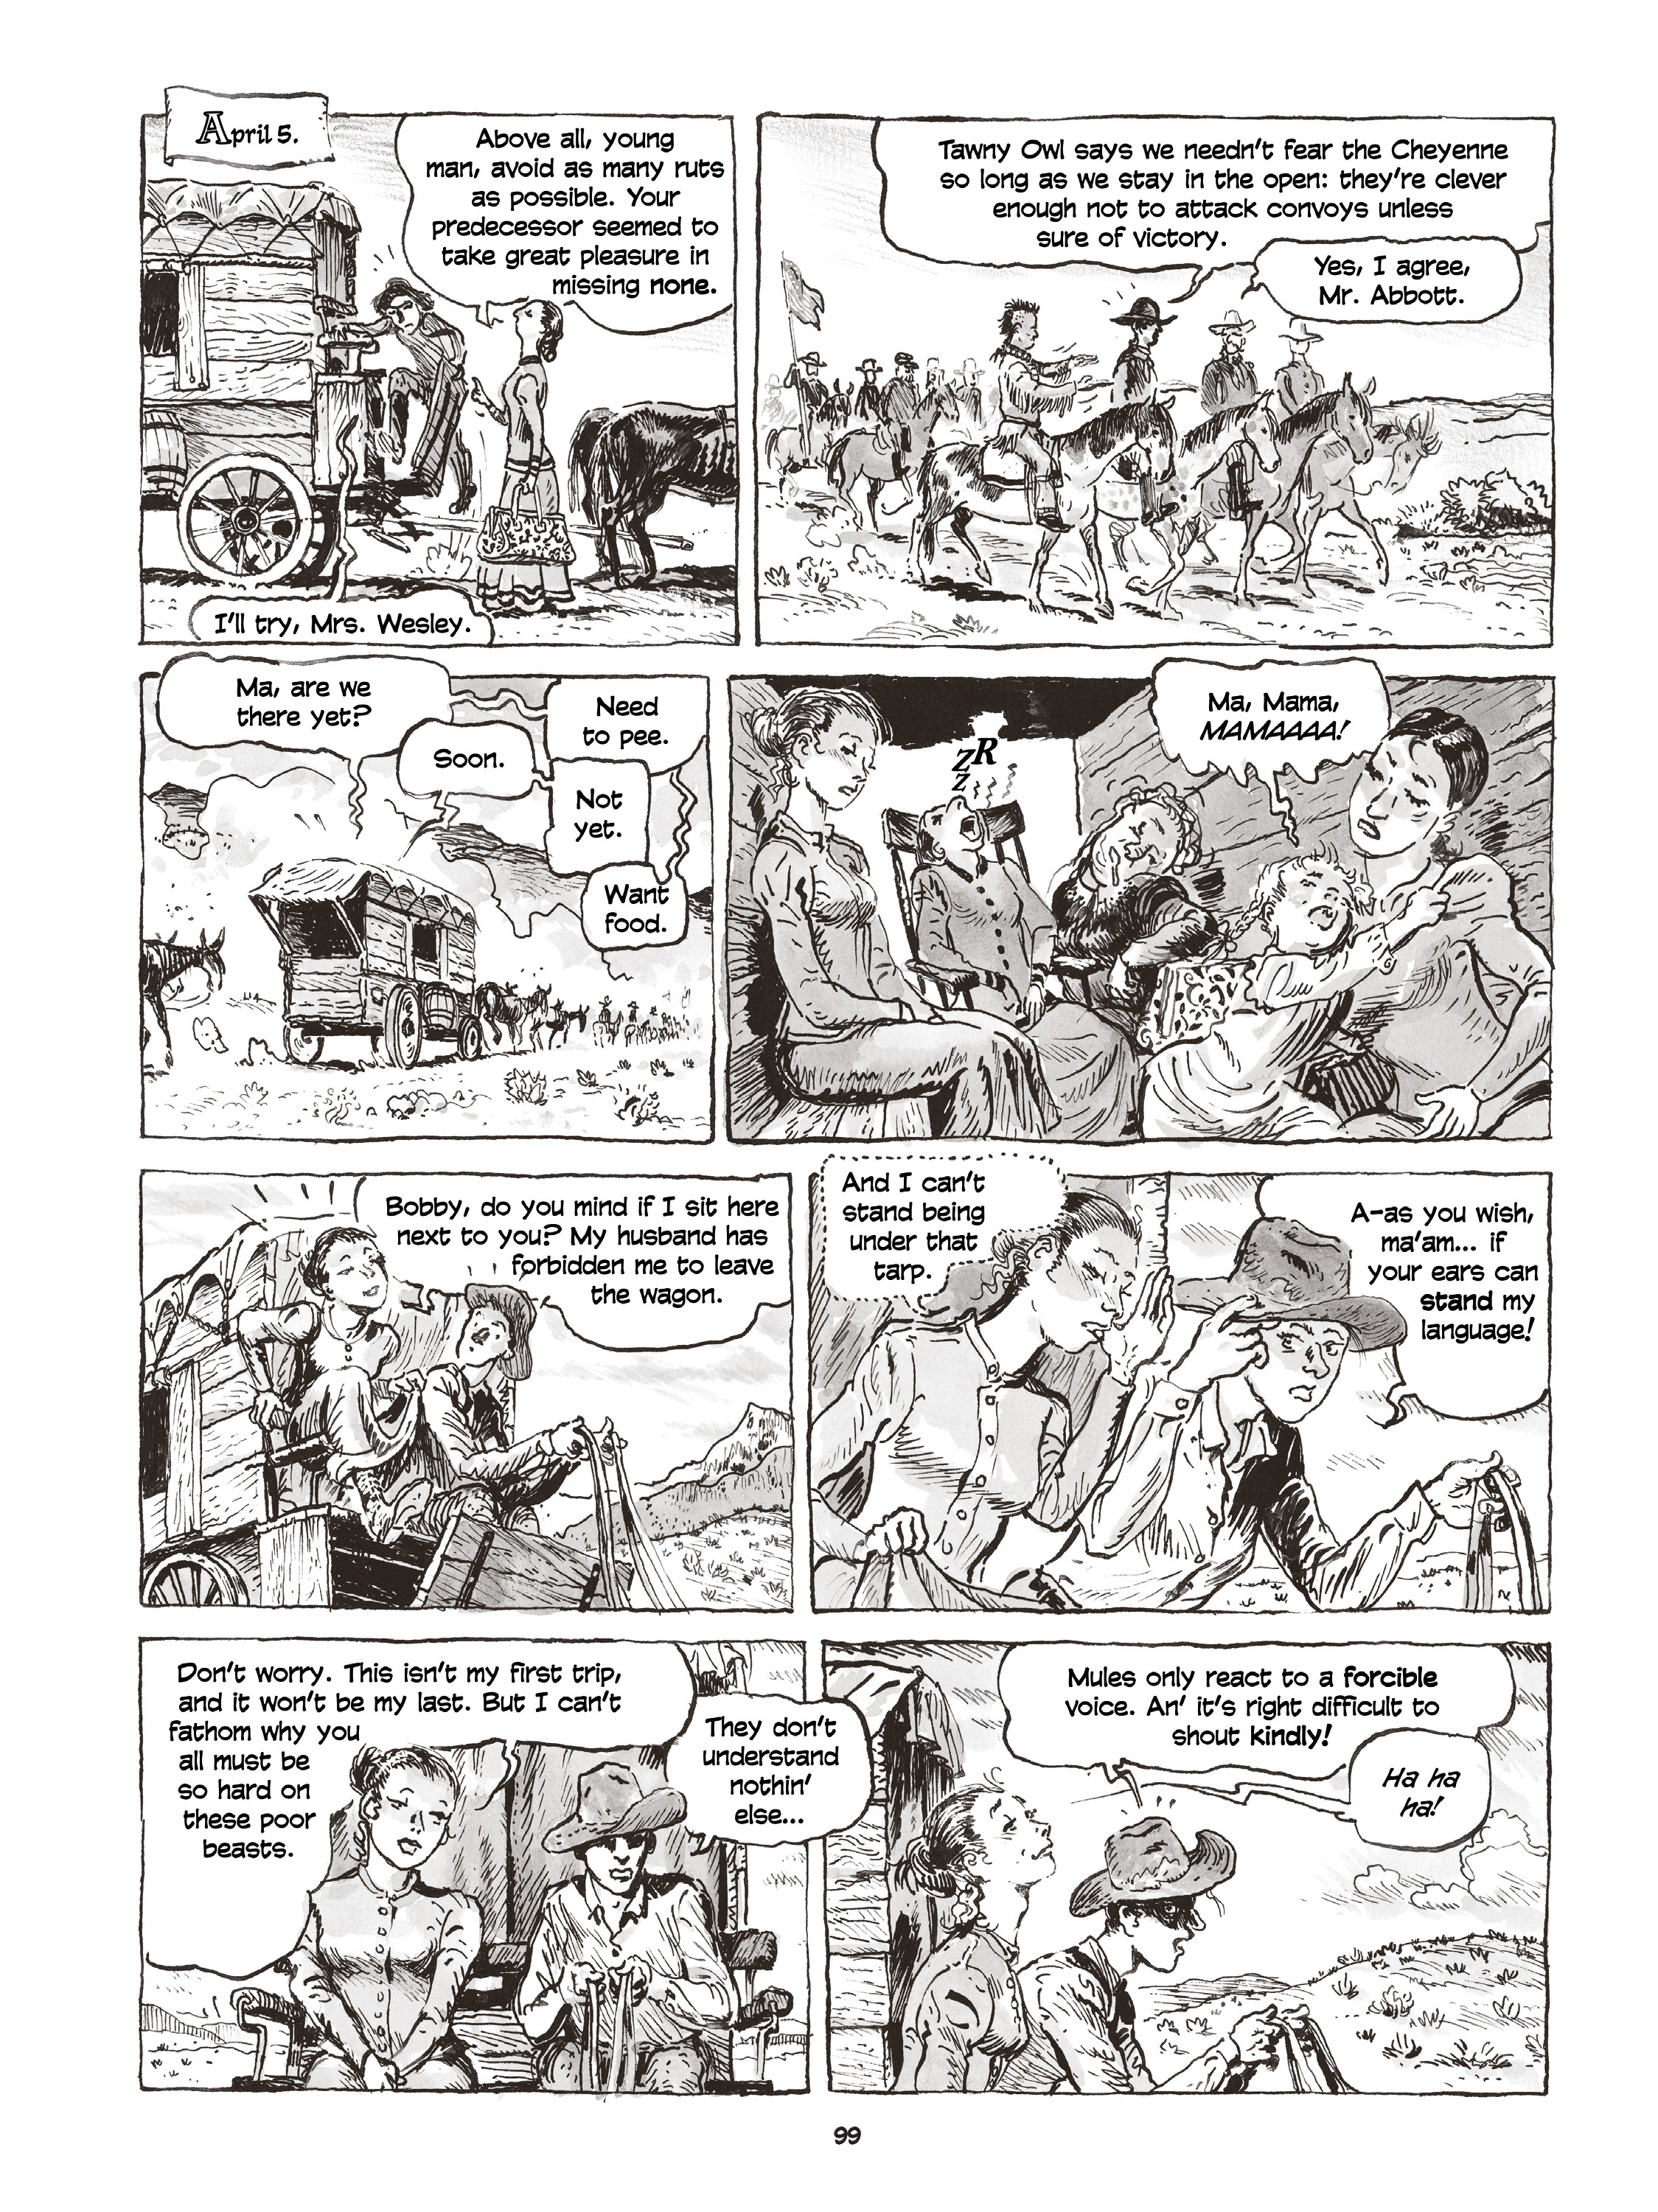 Read online Calamity Jane: The Calamitous Life of Martha Jane Cannary comic -  Issue # TPB (Part 1) - 96